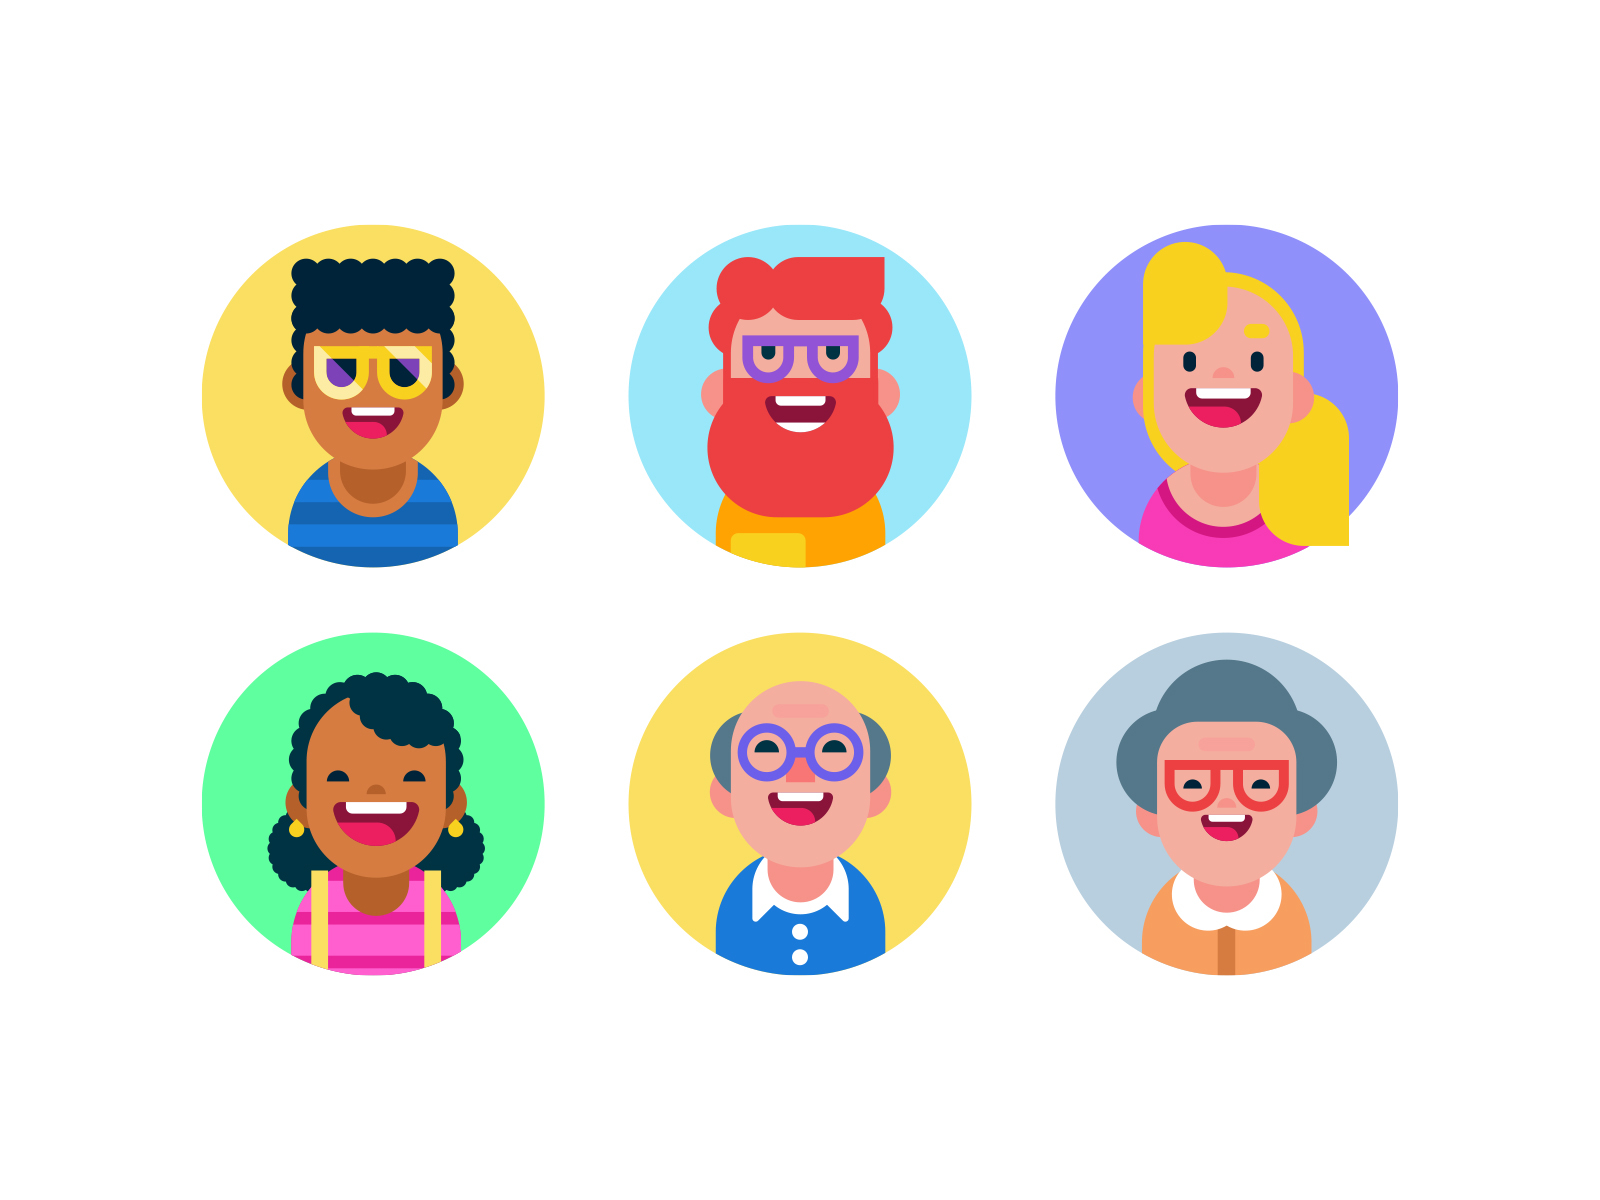 Flat Design Avatar Icons Digital Art Characters By Mark Rise On Dribbble 4310